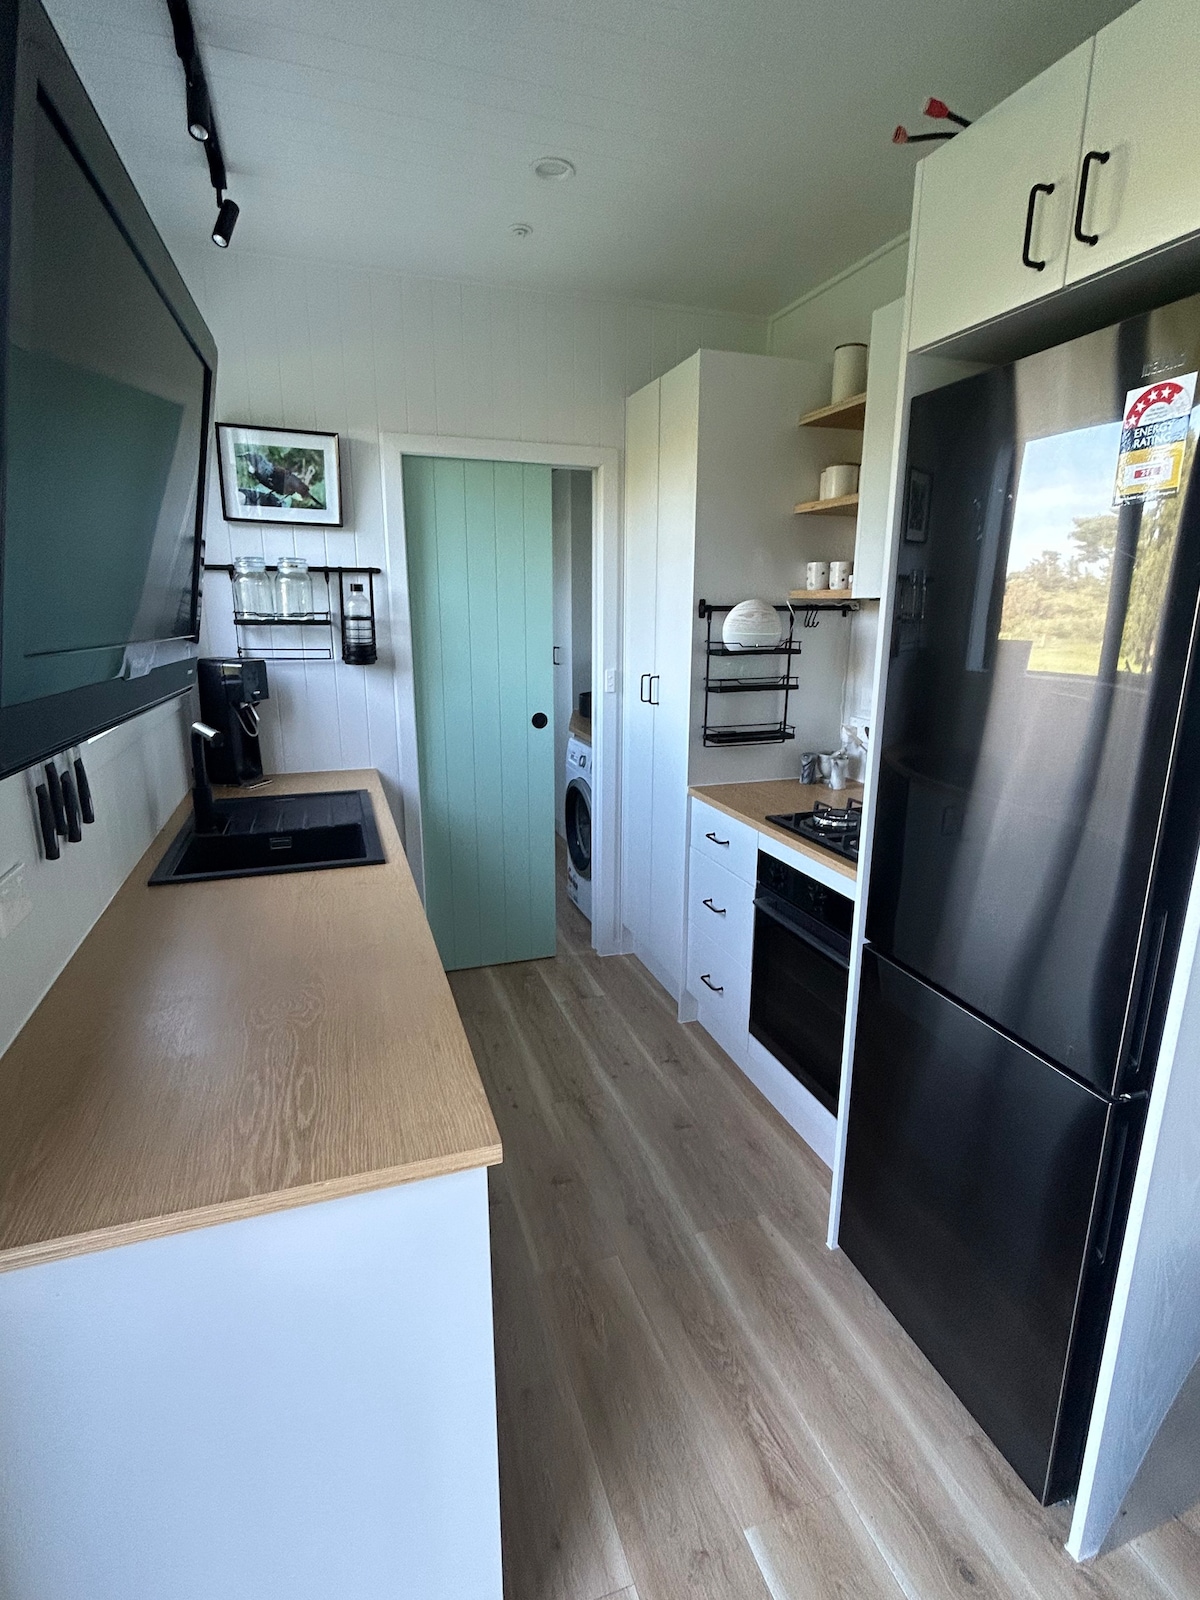 Tui Tiny House farmstay - kids and dogs welcome